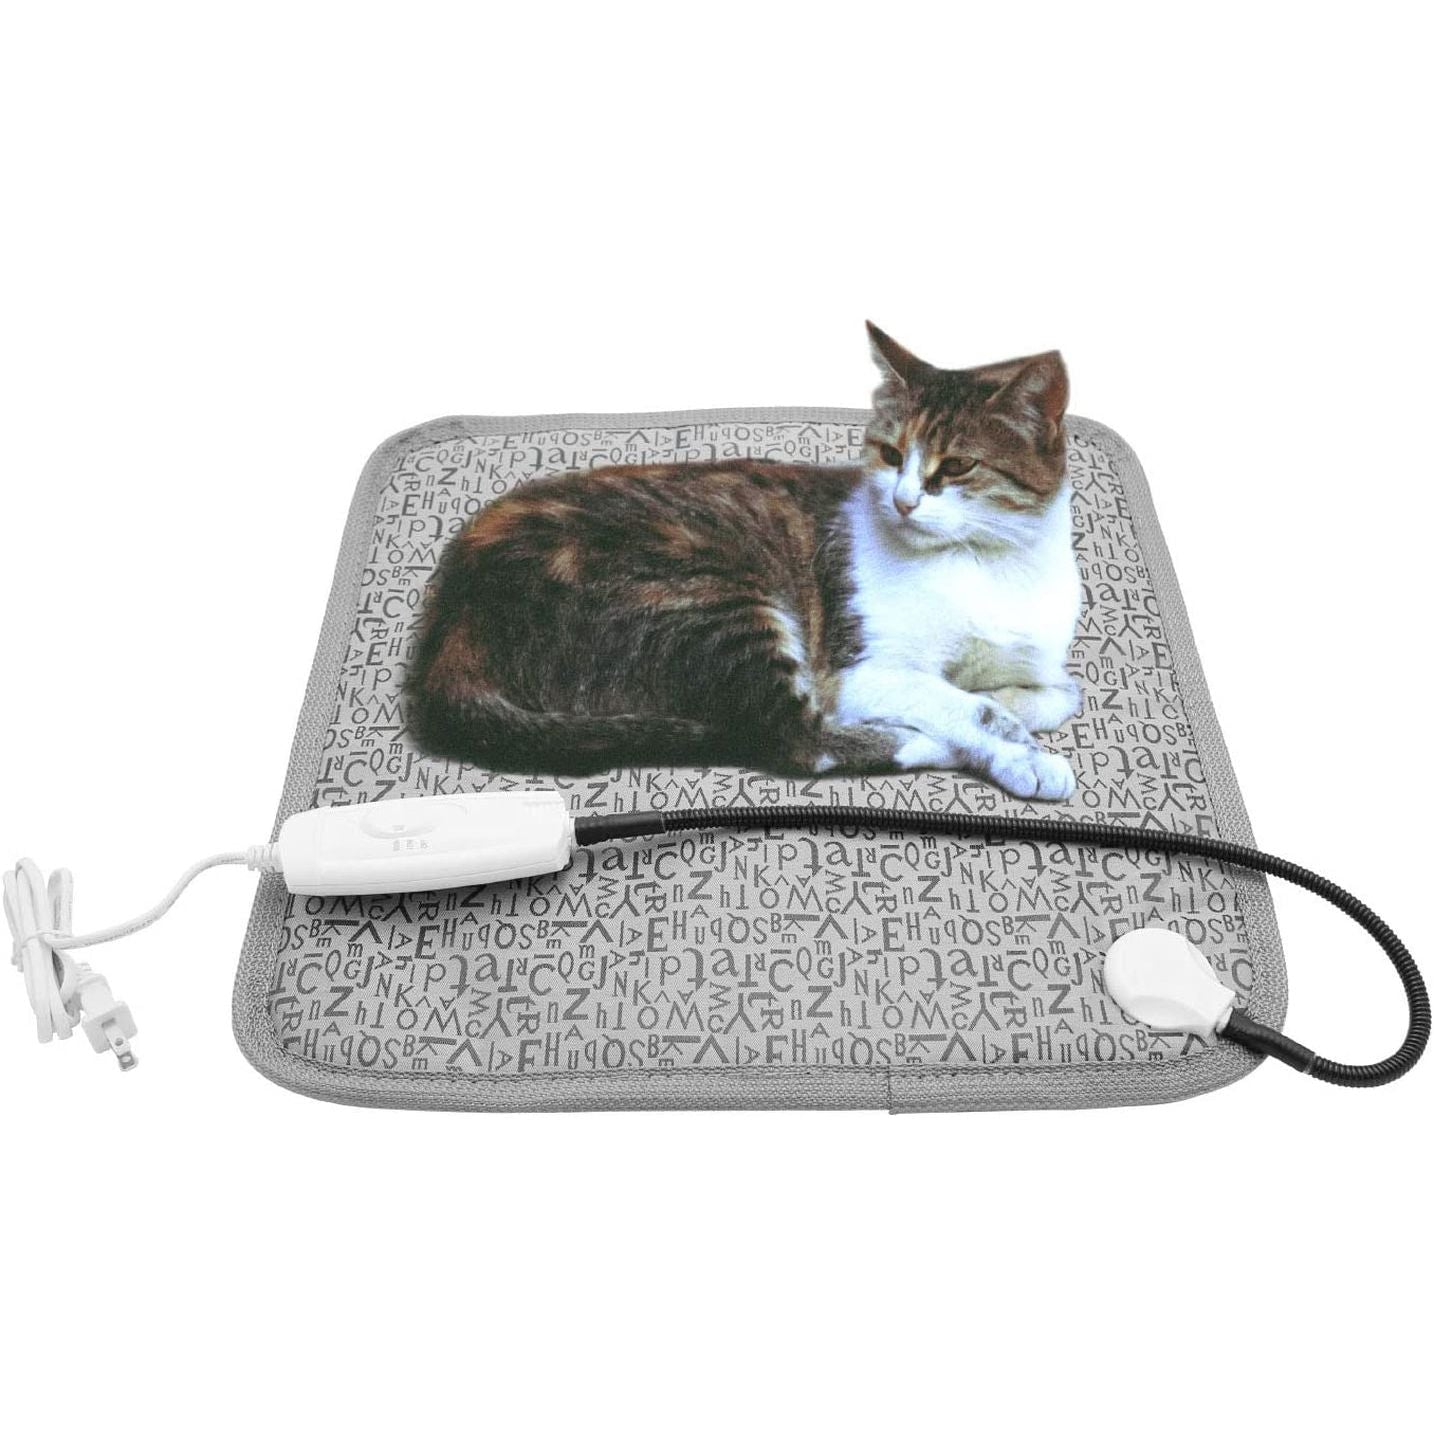 Pet Heating Pad, Dog Cat Electric Heated Blanket Mat, Temperature Warming Cushion Bed with anti Bite Tube